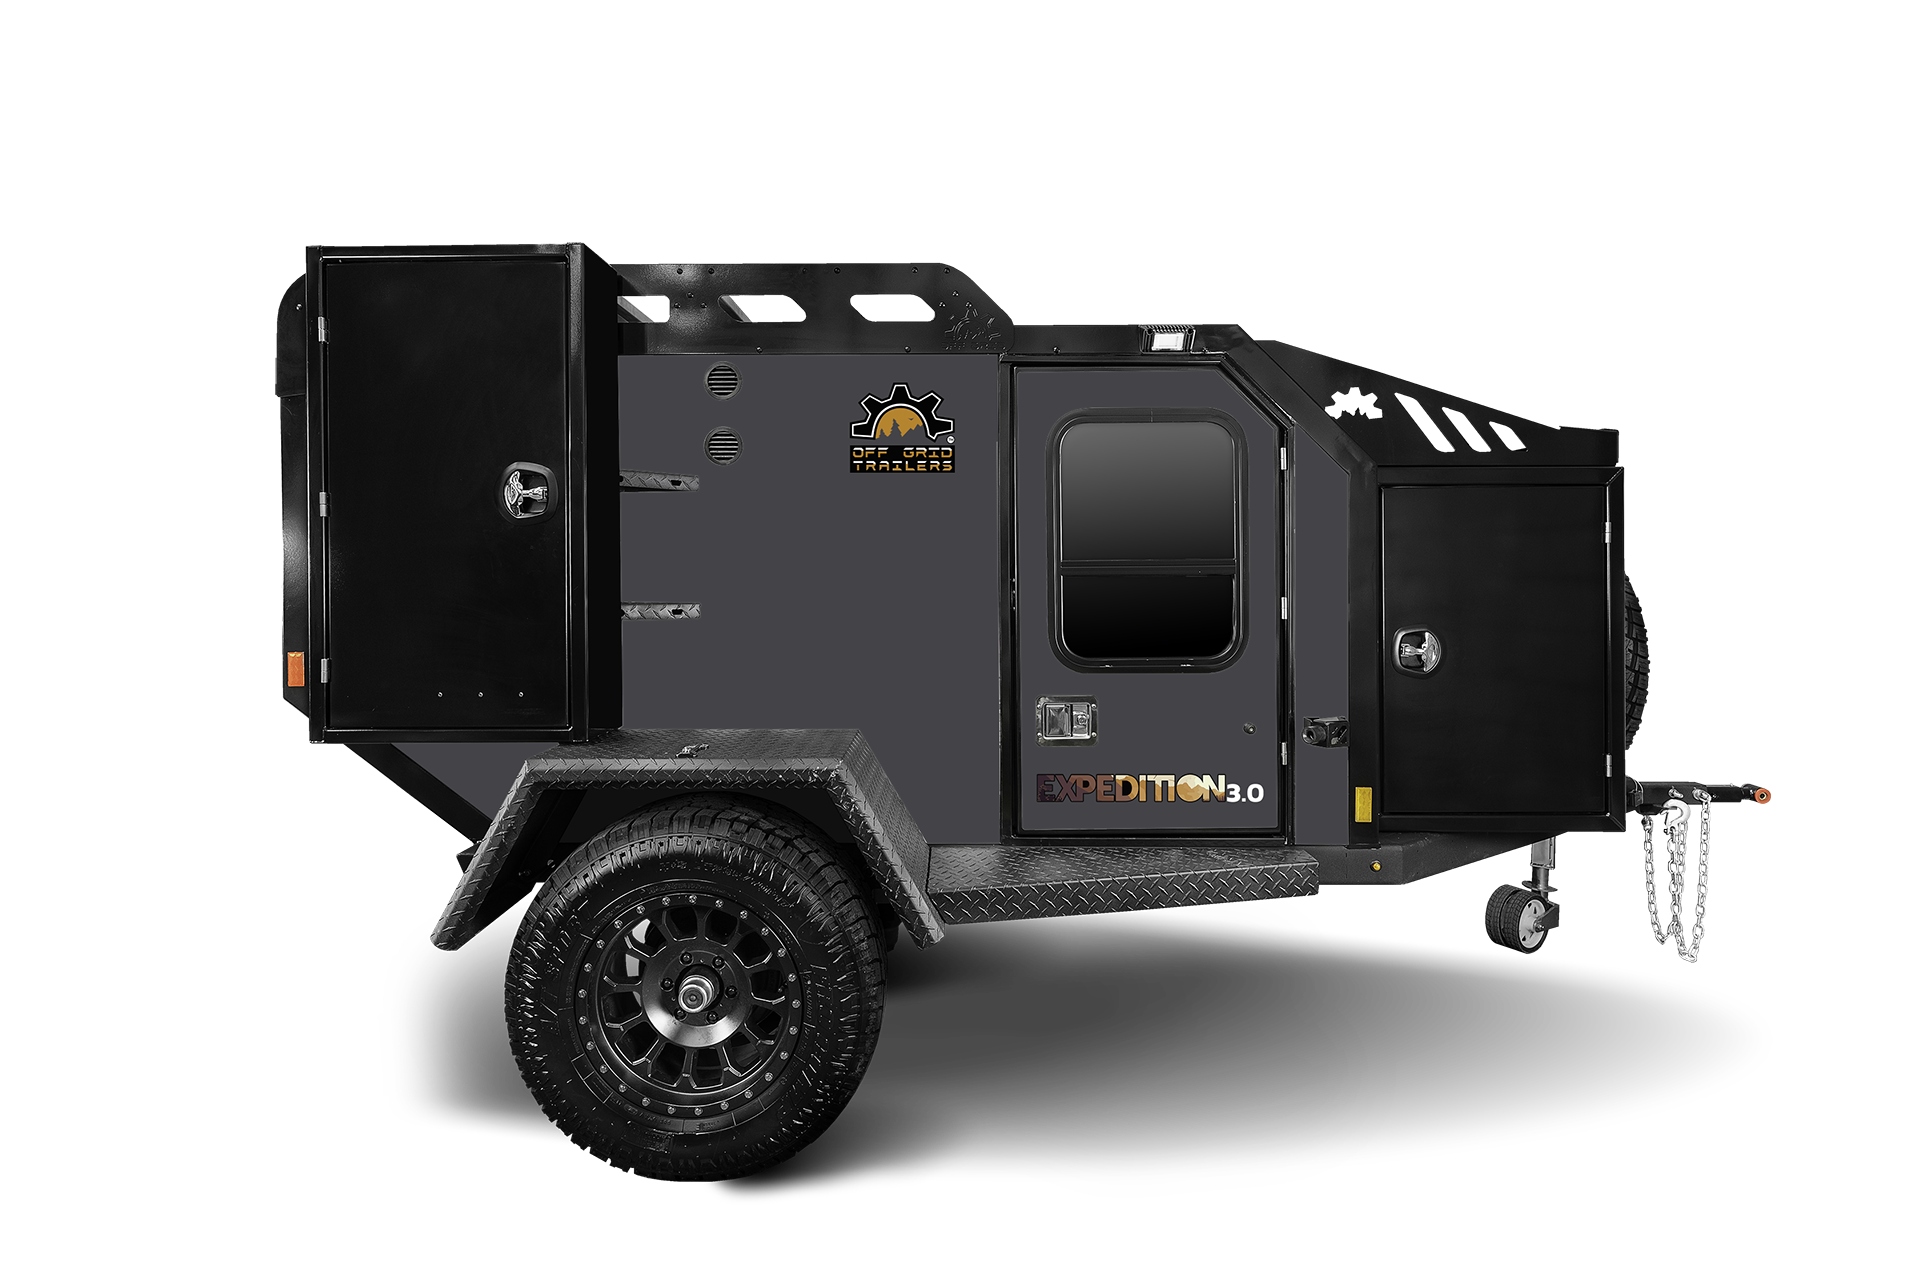 2024 EXPEDITION 3.0 OVERLAND TRAILER (#3068)